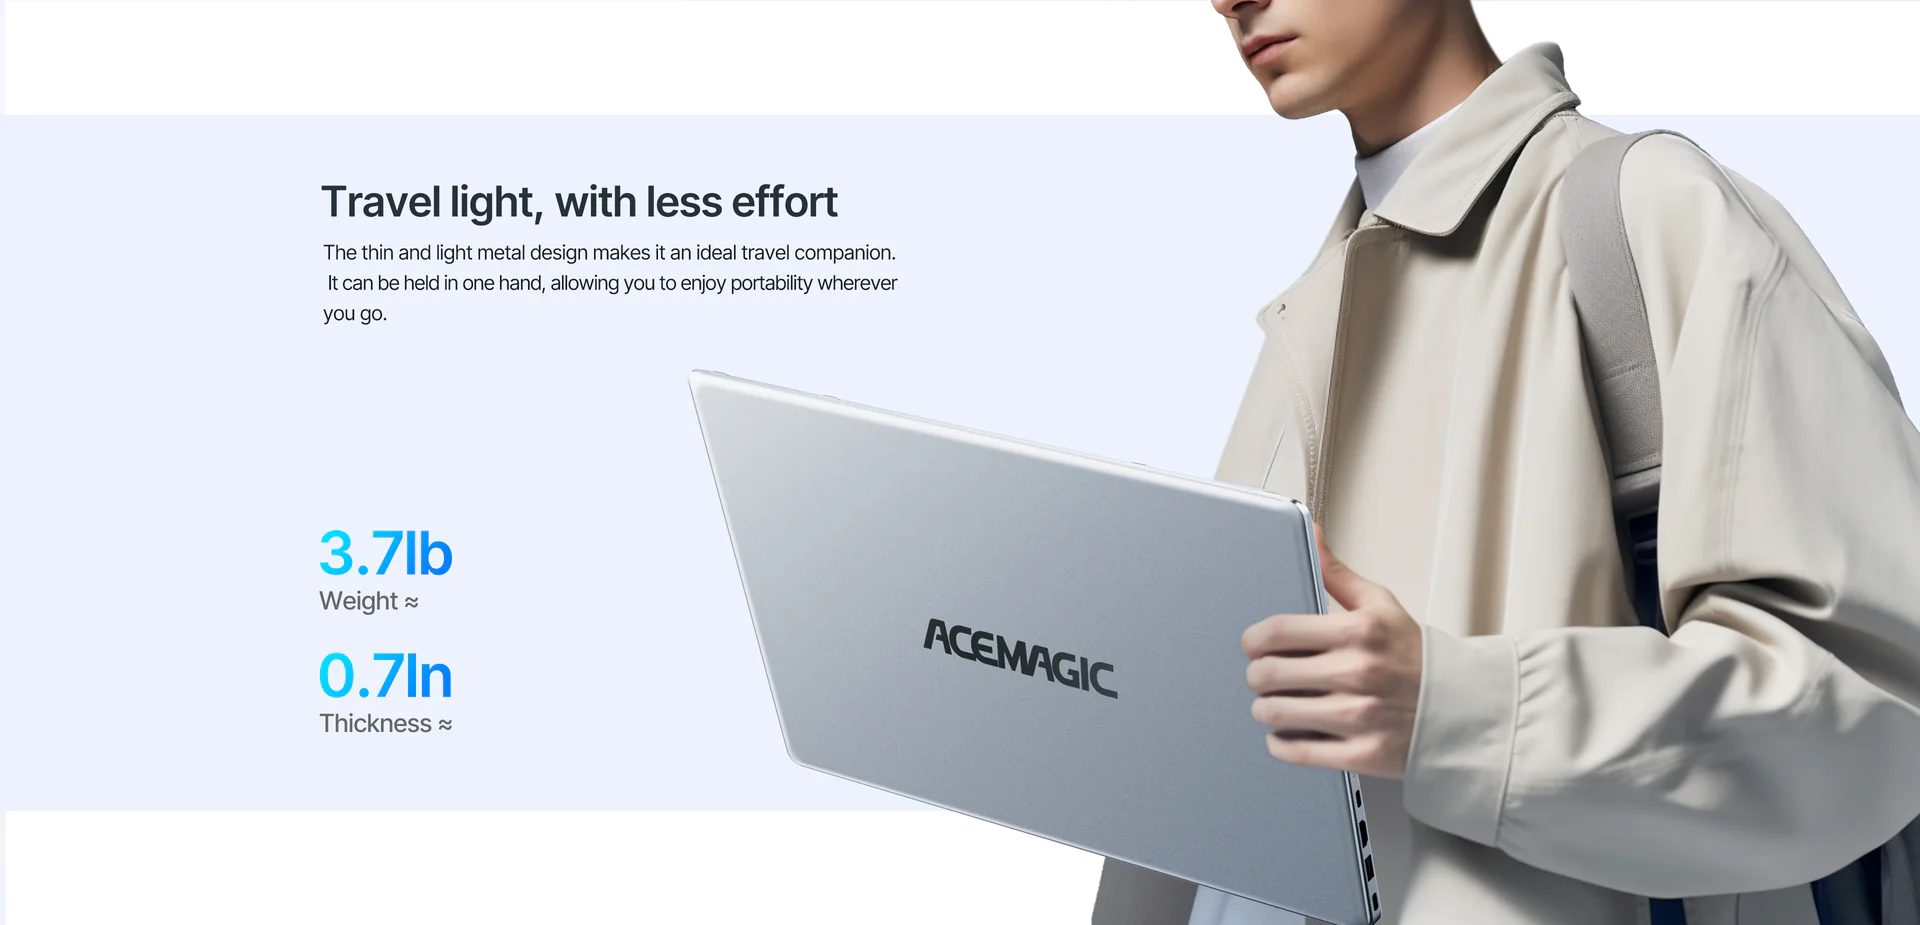 ACEMAGIC - An Affordable Laptop Option for Work, School, or General Use 